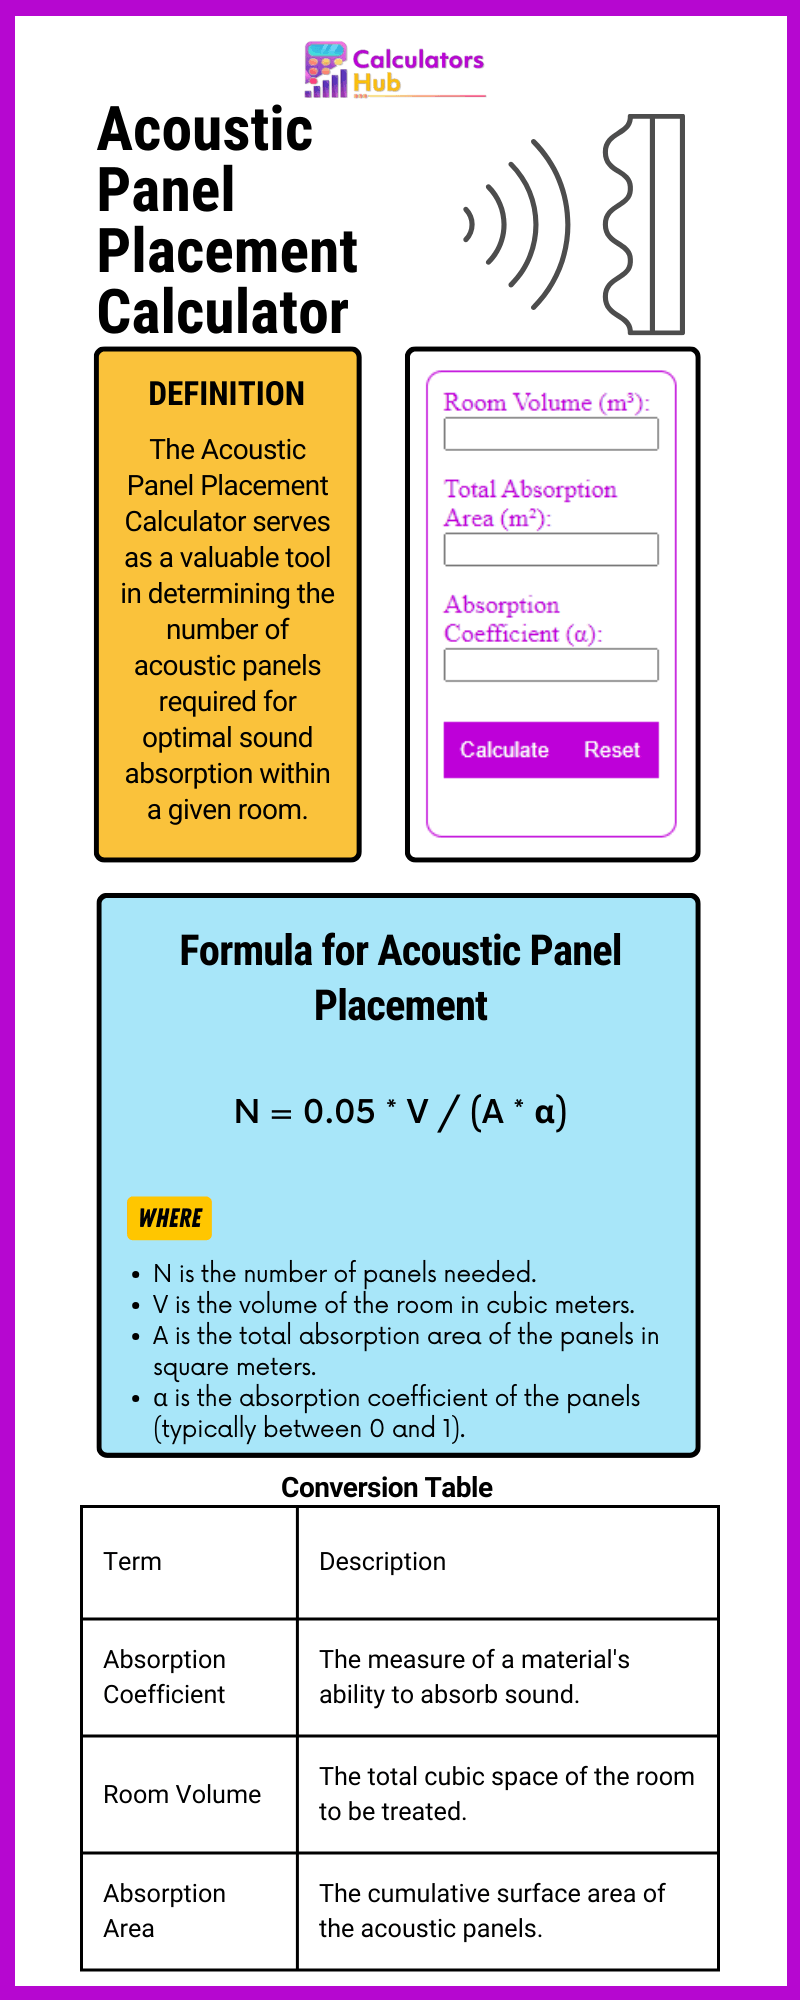 Acoustic Panel Placement Calculator